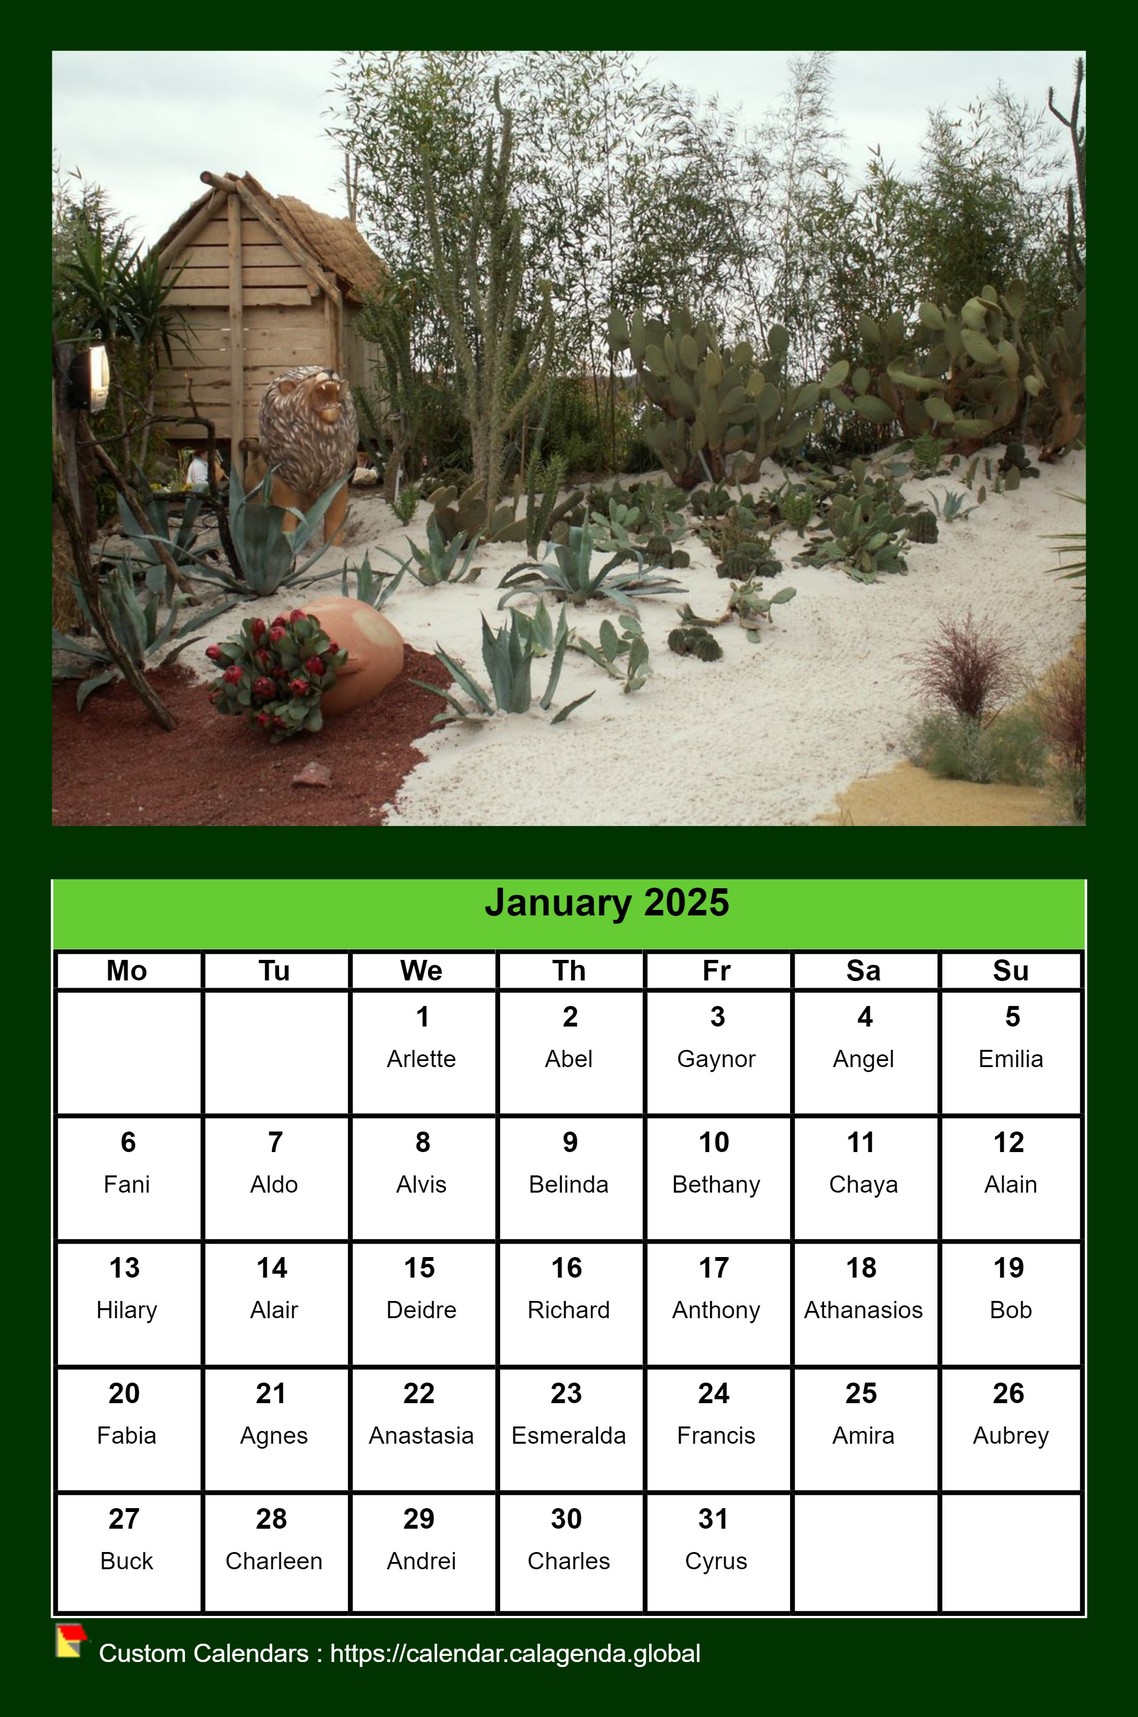 Calendar monthly 2025 with a different photo every month